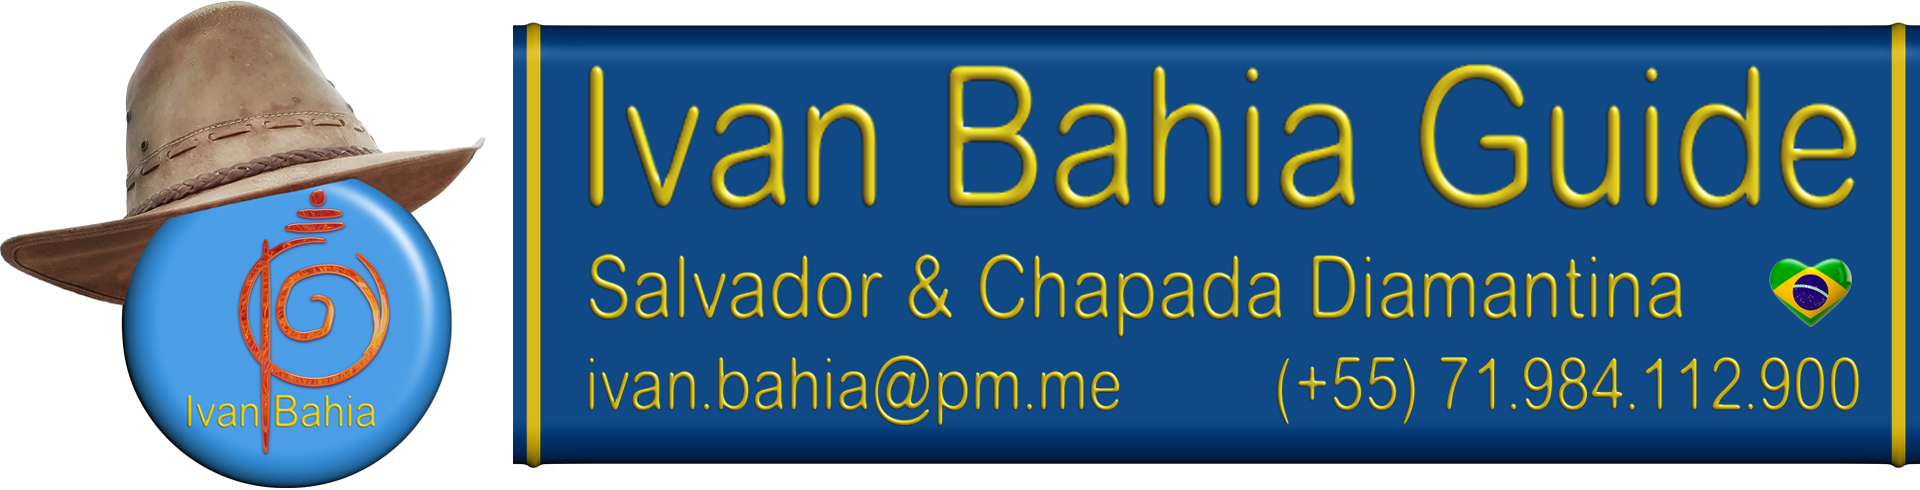 Discover Bahia with Ivan Bahia, travel agency in Salvador da Bahia, the original Capital of Brazil with TOP private tours & guides, your best experience (in English - Français - Nederlands) in Bahia, Chapada Diamantina National Park, All Saints Bay, Cachoeira, Recôncavo Baiano, Praia do Forte, Coconut coast and Bahia / NE-Brazil #ivanbahia #ivanbahiaguide #ivansalvadorbahia #salvadorbahiabrazil #bahiatourism #salvadorbahiatravel #toursbylocals #chapadadiamantinatransfer #chapadadiamantina #chapadaexperience #voyagebresil #bresilessentiel #salvadortourguide #chapadadiamantinatrekking #brazilhoneymoon #gaytravelinfo #gayhoneymoon #gayholiday #lgbttravel #lgbtqfriendly #lgbttourism #gayworldwide #gaytravelguide #gaytravelinsta #gayworld #gaystraveltoo #thegaypassport #wearetravelgays #gaycation #gaytravellers #gaytravel #gaytravelbrazil #reconcavobaiano #bahiaguide #bahiametisse #guidedetourismesalvadorbahiabresil #transatjacquesvabres #sailingbrazil #morrodopaiinacio #FotosChapadaDiamantina #BahiaTourism #SalvadorBahiaBrazil #FotosBahia #SalvadorBahiaTravel #bahiatour #toursbahia #bahiatravel #salvadortourguide #ssalovers #voyagegay #voyagelgbt #gayvoyageur #gayvoyages #gaytravelbrazil #lgbtq+friendly #instagay #gaytravelinfo #gayhoneymoon #gayholiday #lgbttravel #lgbtqfriendly #lgbttourism #lgbtq #lgbtqtravel #gayworldwide #gaytravelguide #gaytravelinsta #gayworld #gaystraveltoo #thegaypassport #gaytravelers #wearetravelgays #gaycation #gaytravellers #gaytravel #gaytravelinsta #gaytourist #lgbtqtravelers 